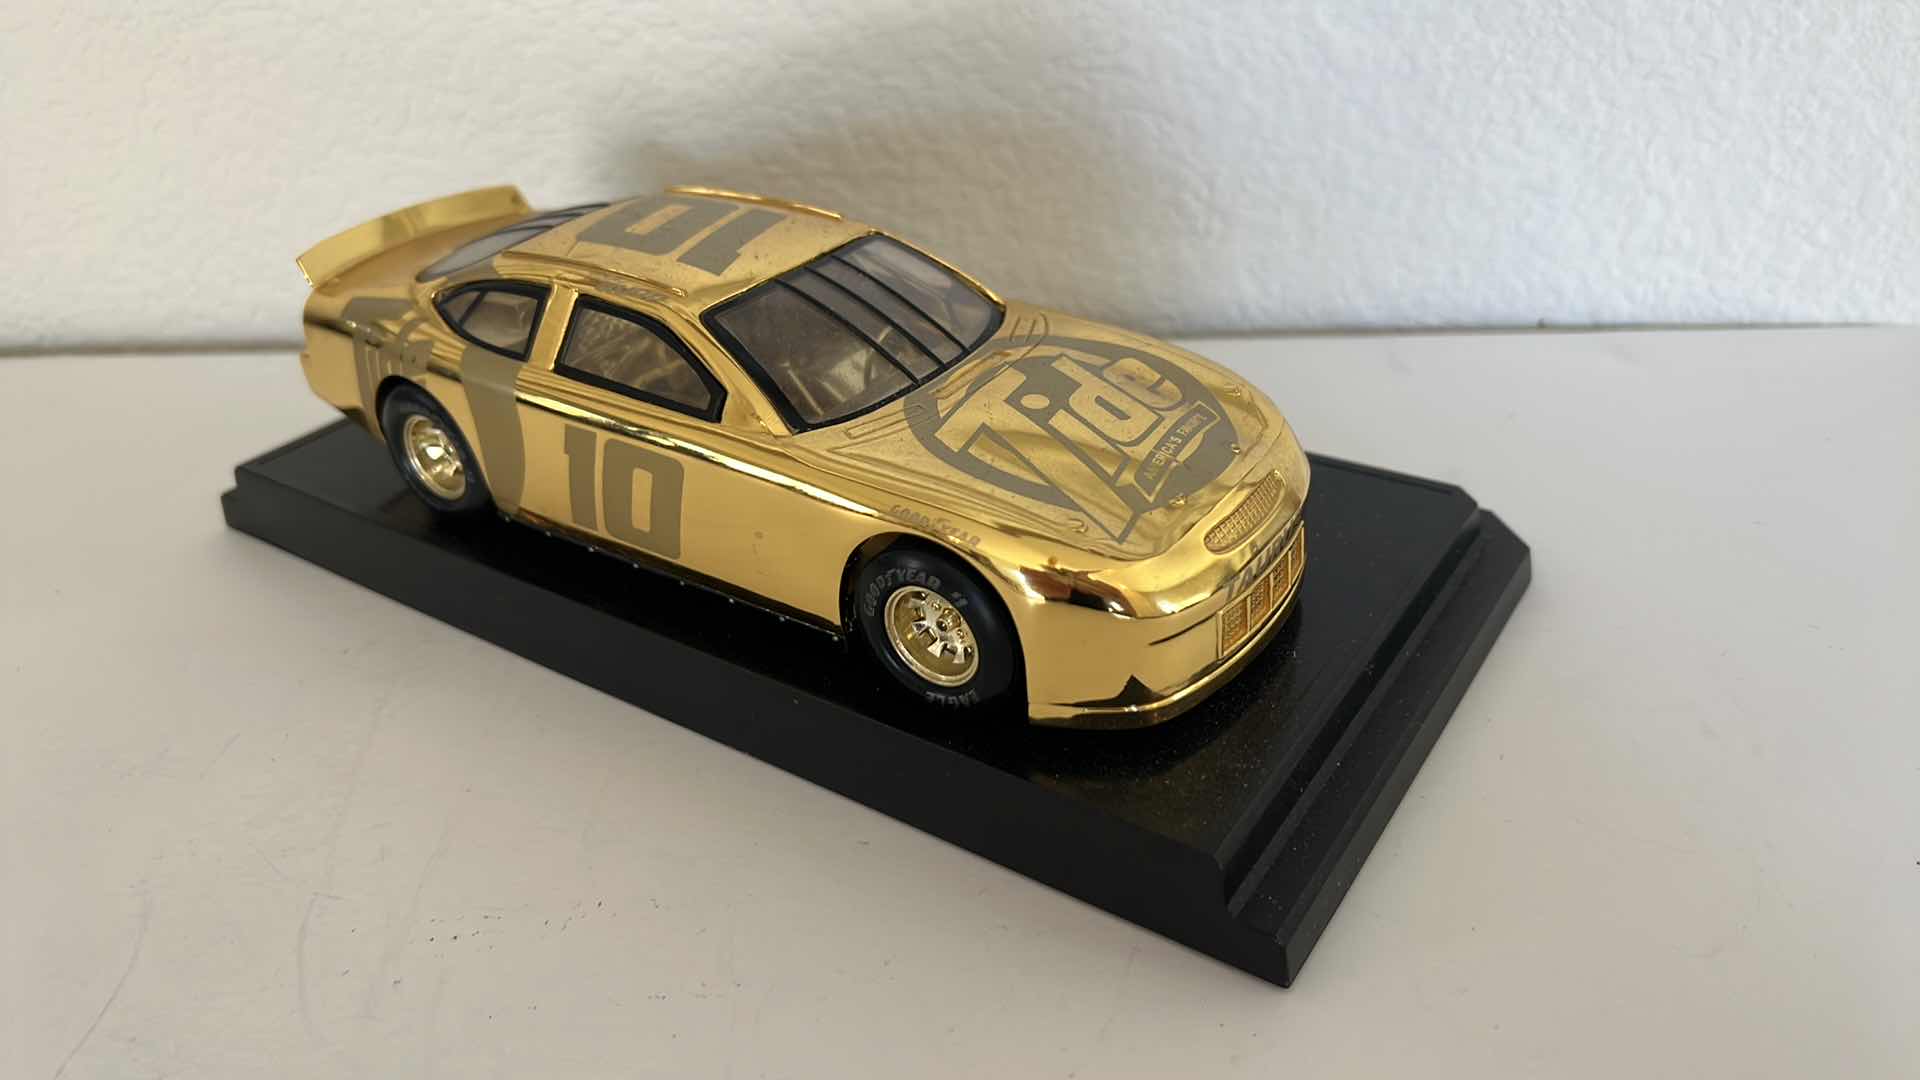 Photo 5 of FORD TAURUS NASCAR “REFLECTIONS IN GOLD” DIE CAST MODEL CAR